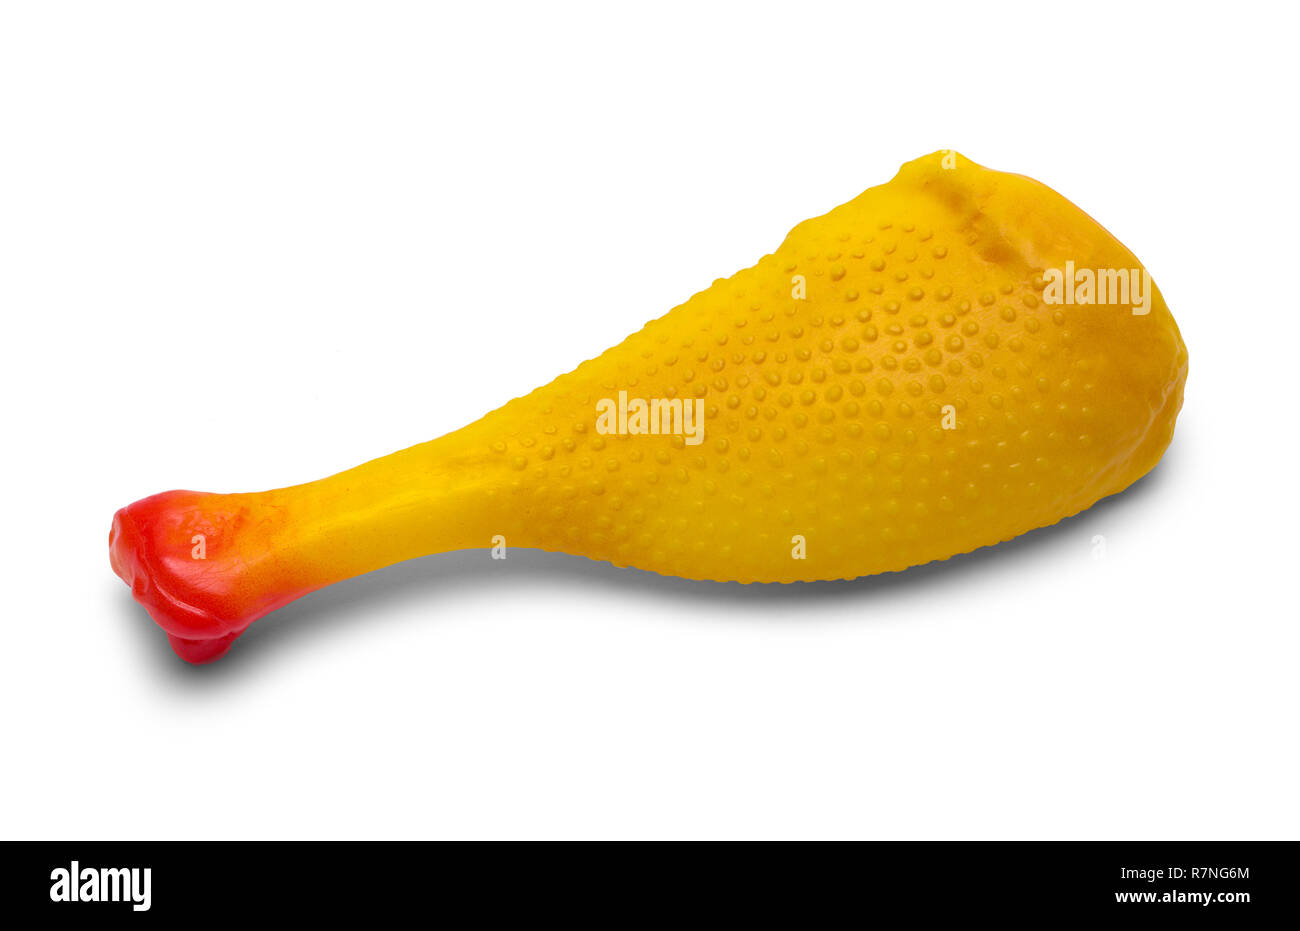 Toy Rubber Chicken Leg Isolated on White Background. Stock Photo